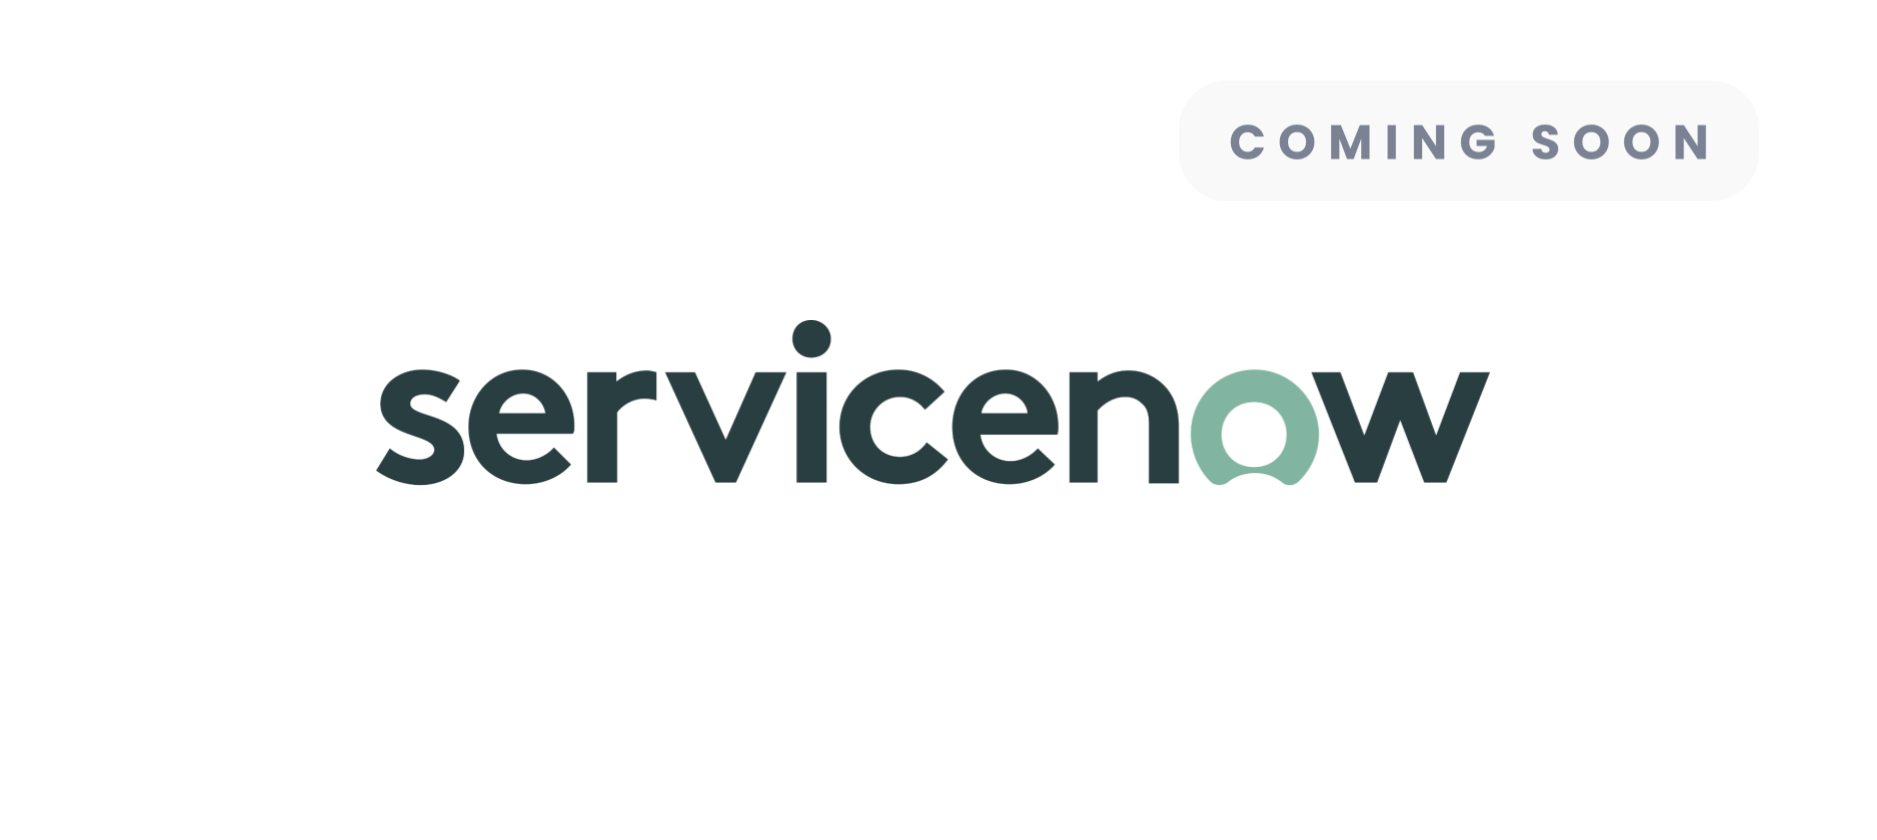 Communication - Servicenow - Coming soon